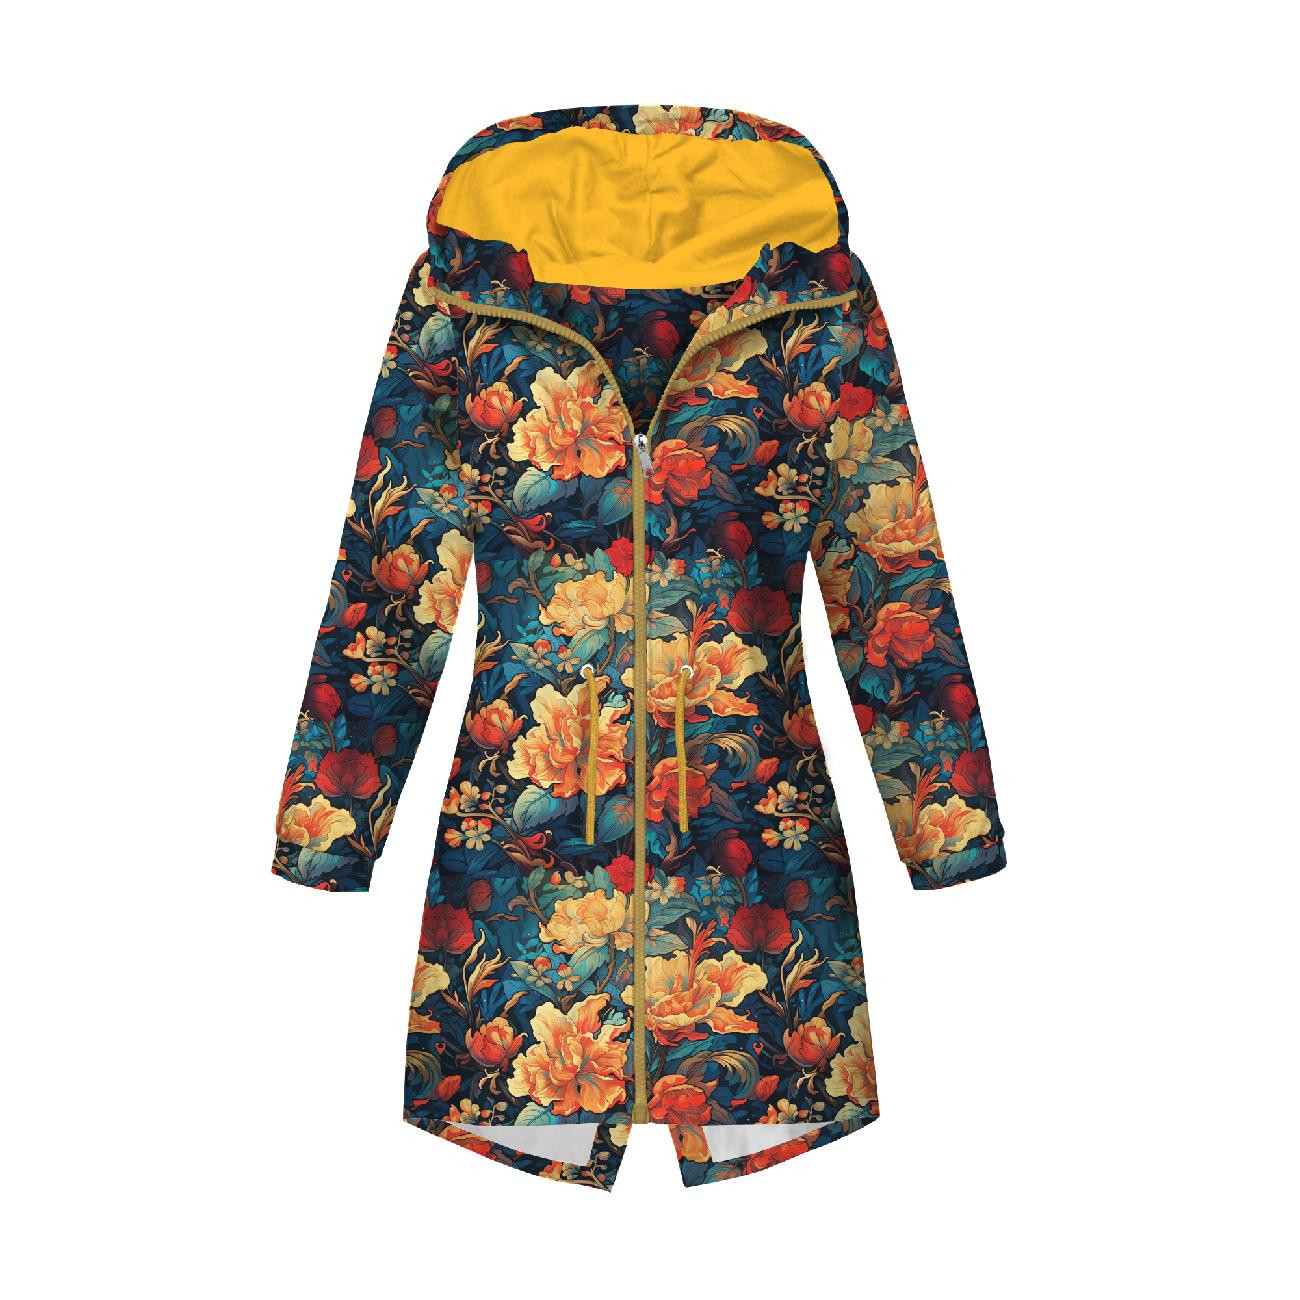 WOMEN'S PARKA (ANNA) - VINTAGE CHINESE FLOWERS PAT. 4 - sewing set